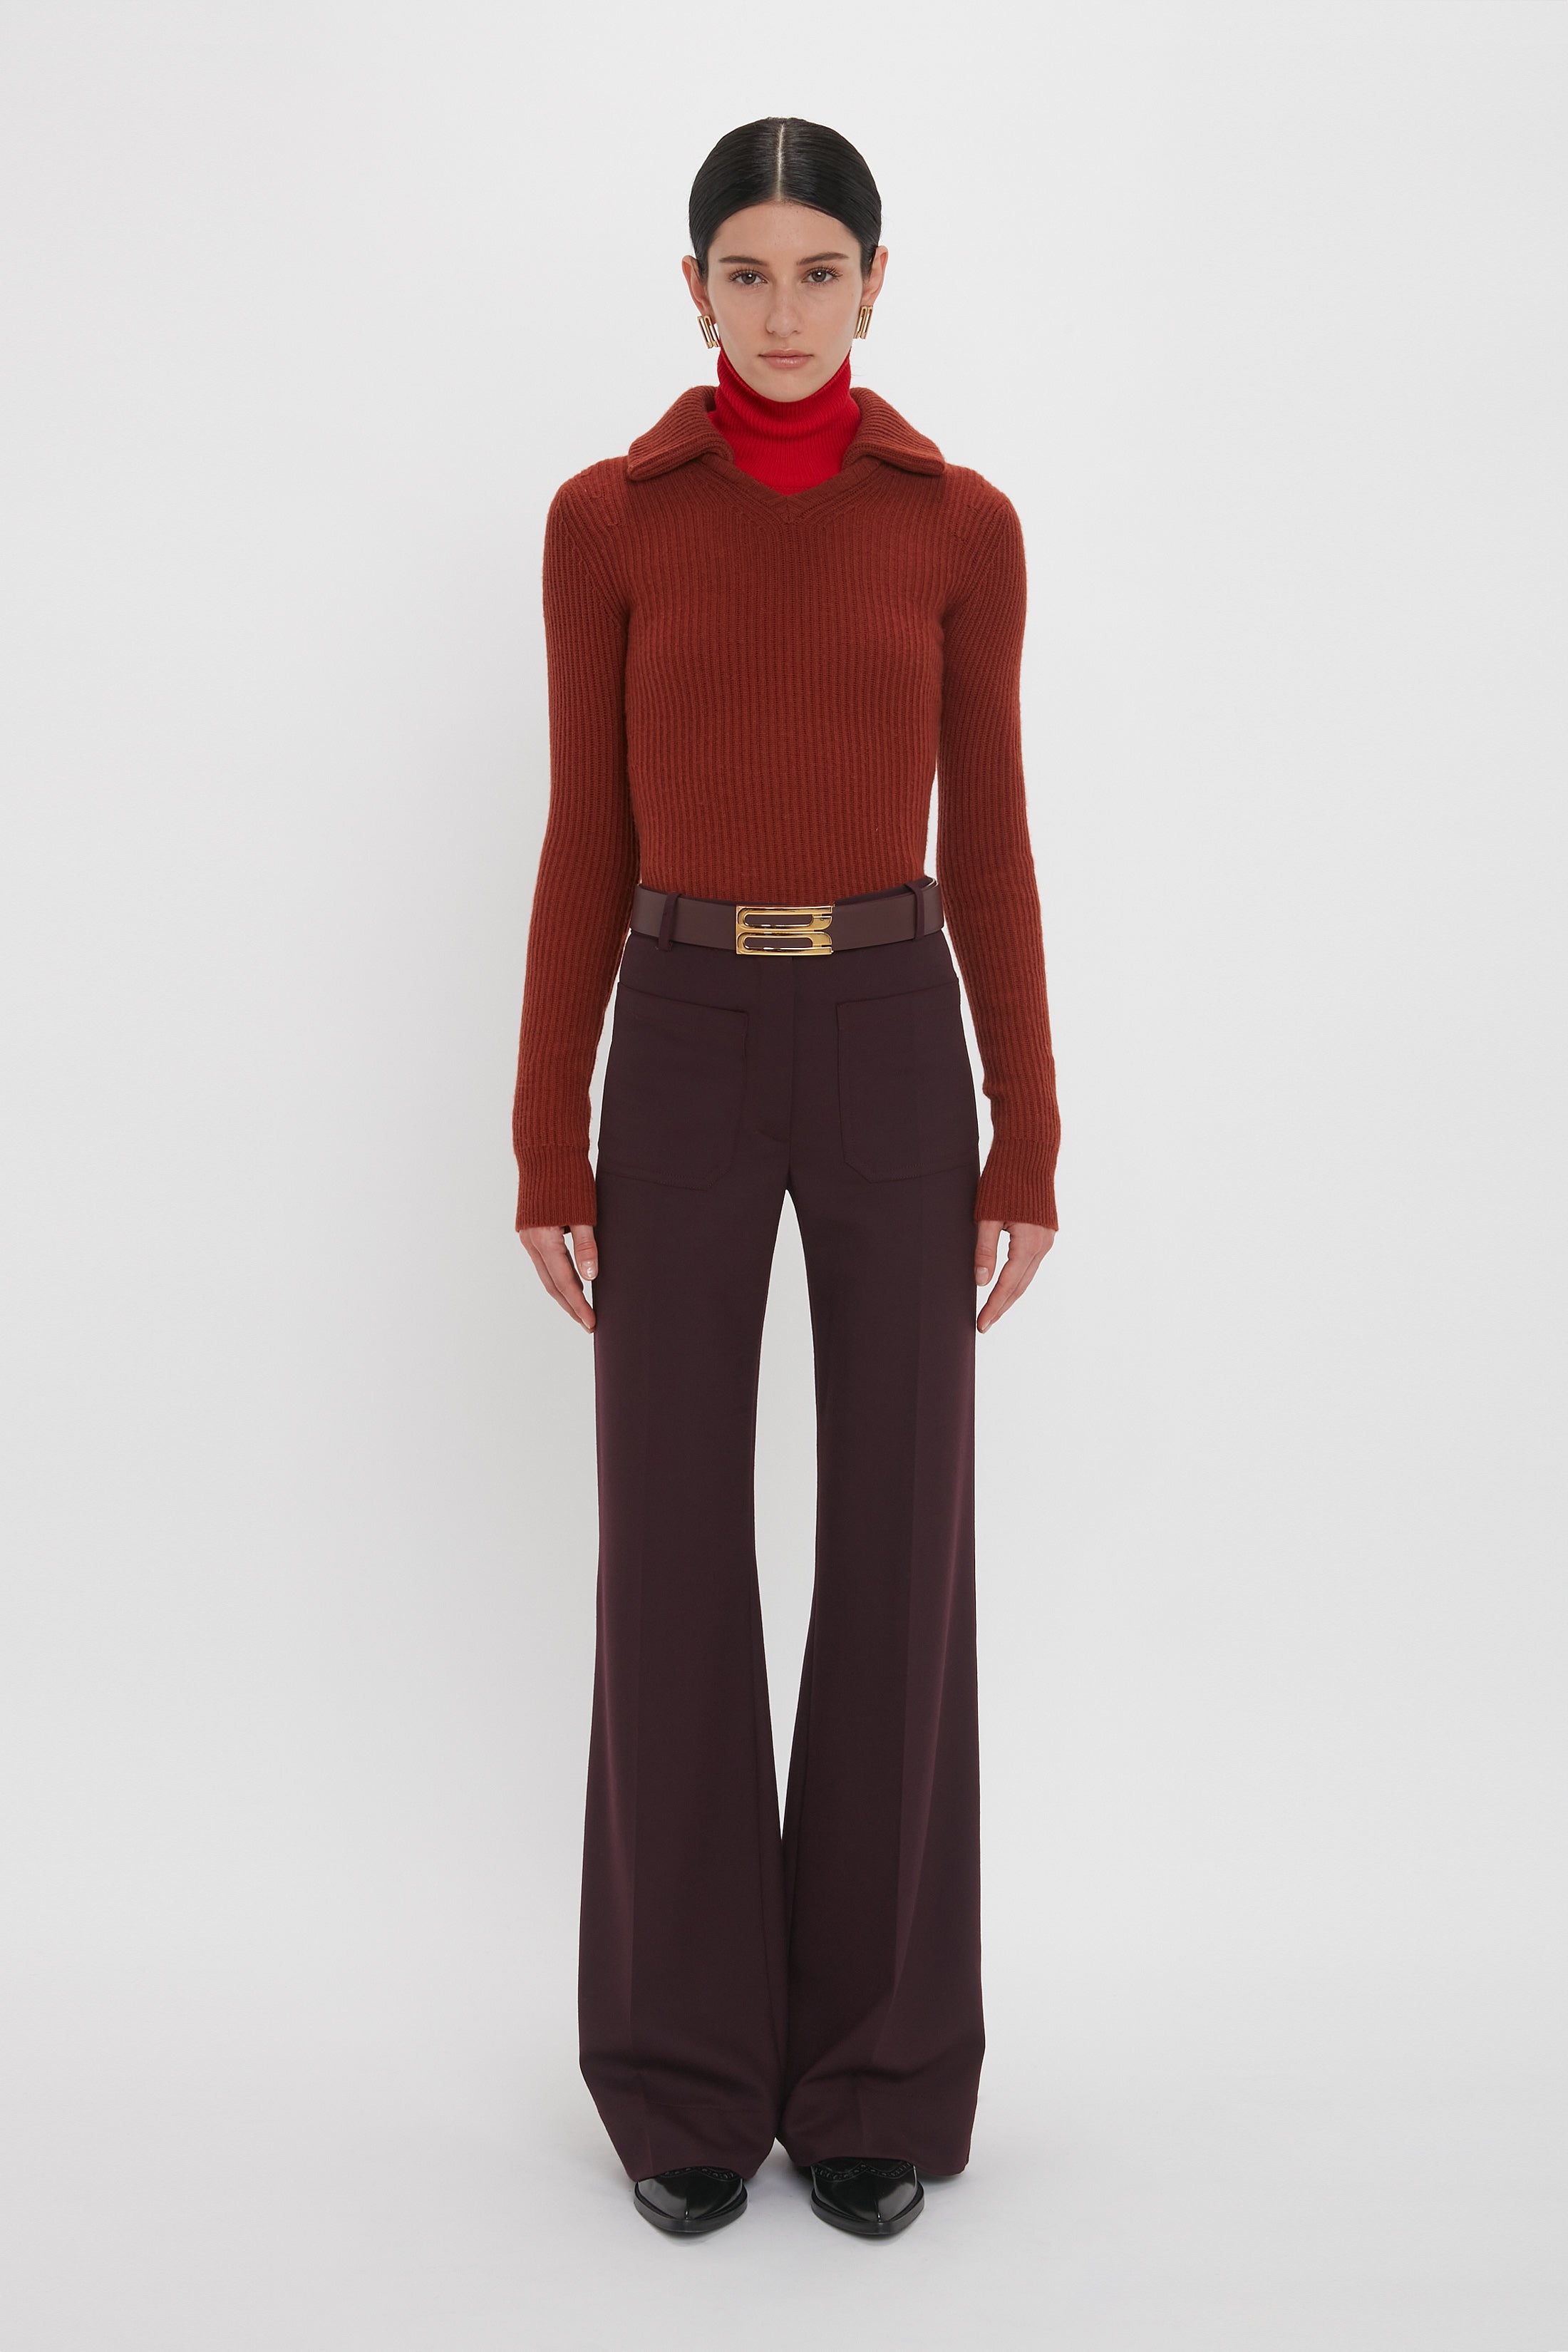 Double Collared Jumper In Russet - 3